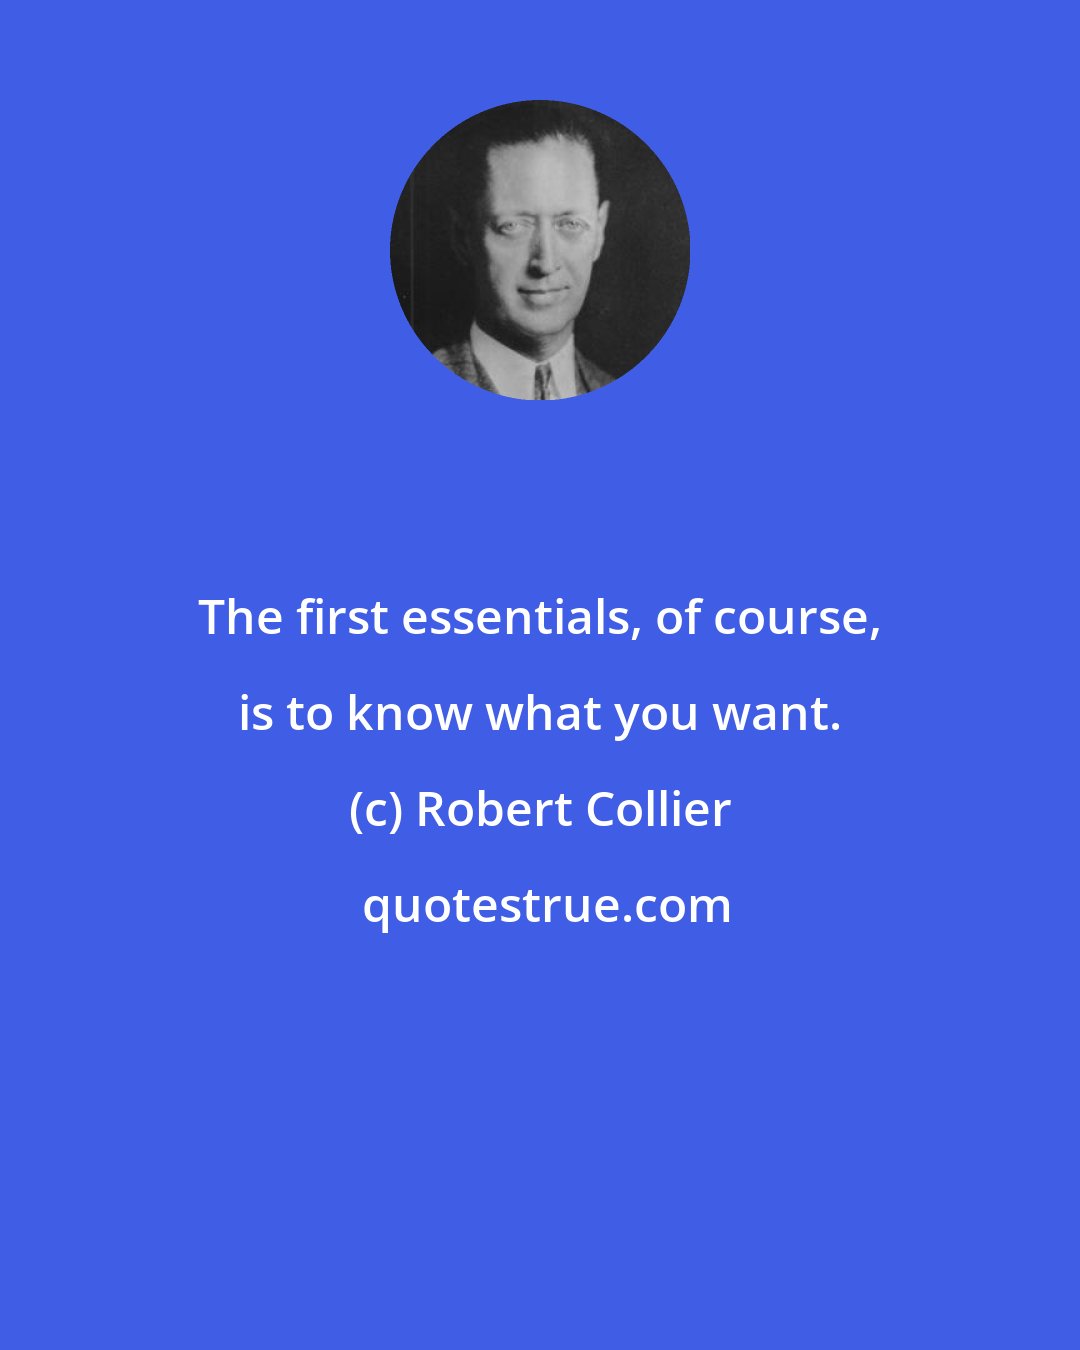 Robert Collier: The first essentials, of course, is to know what you want.